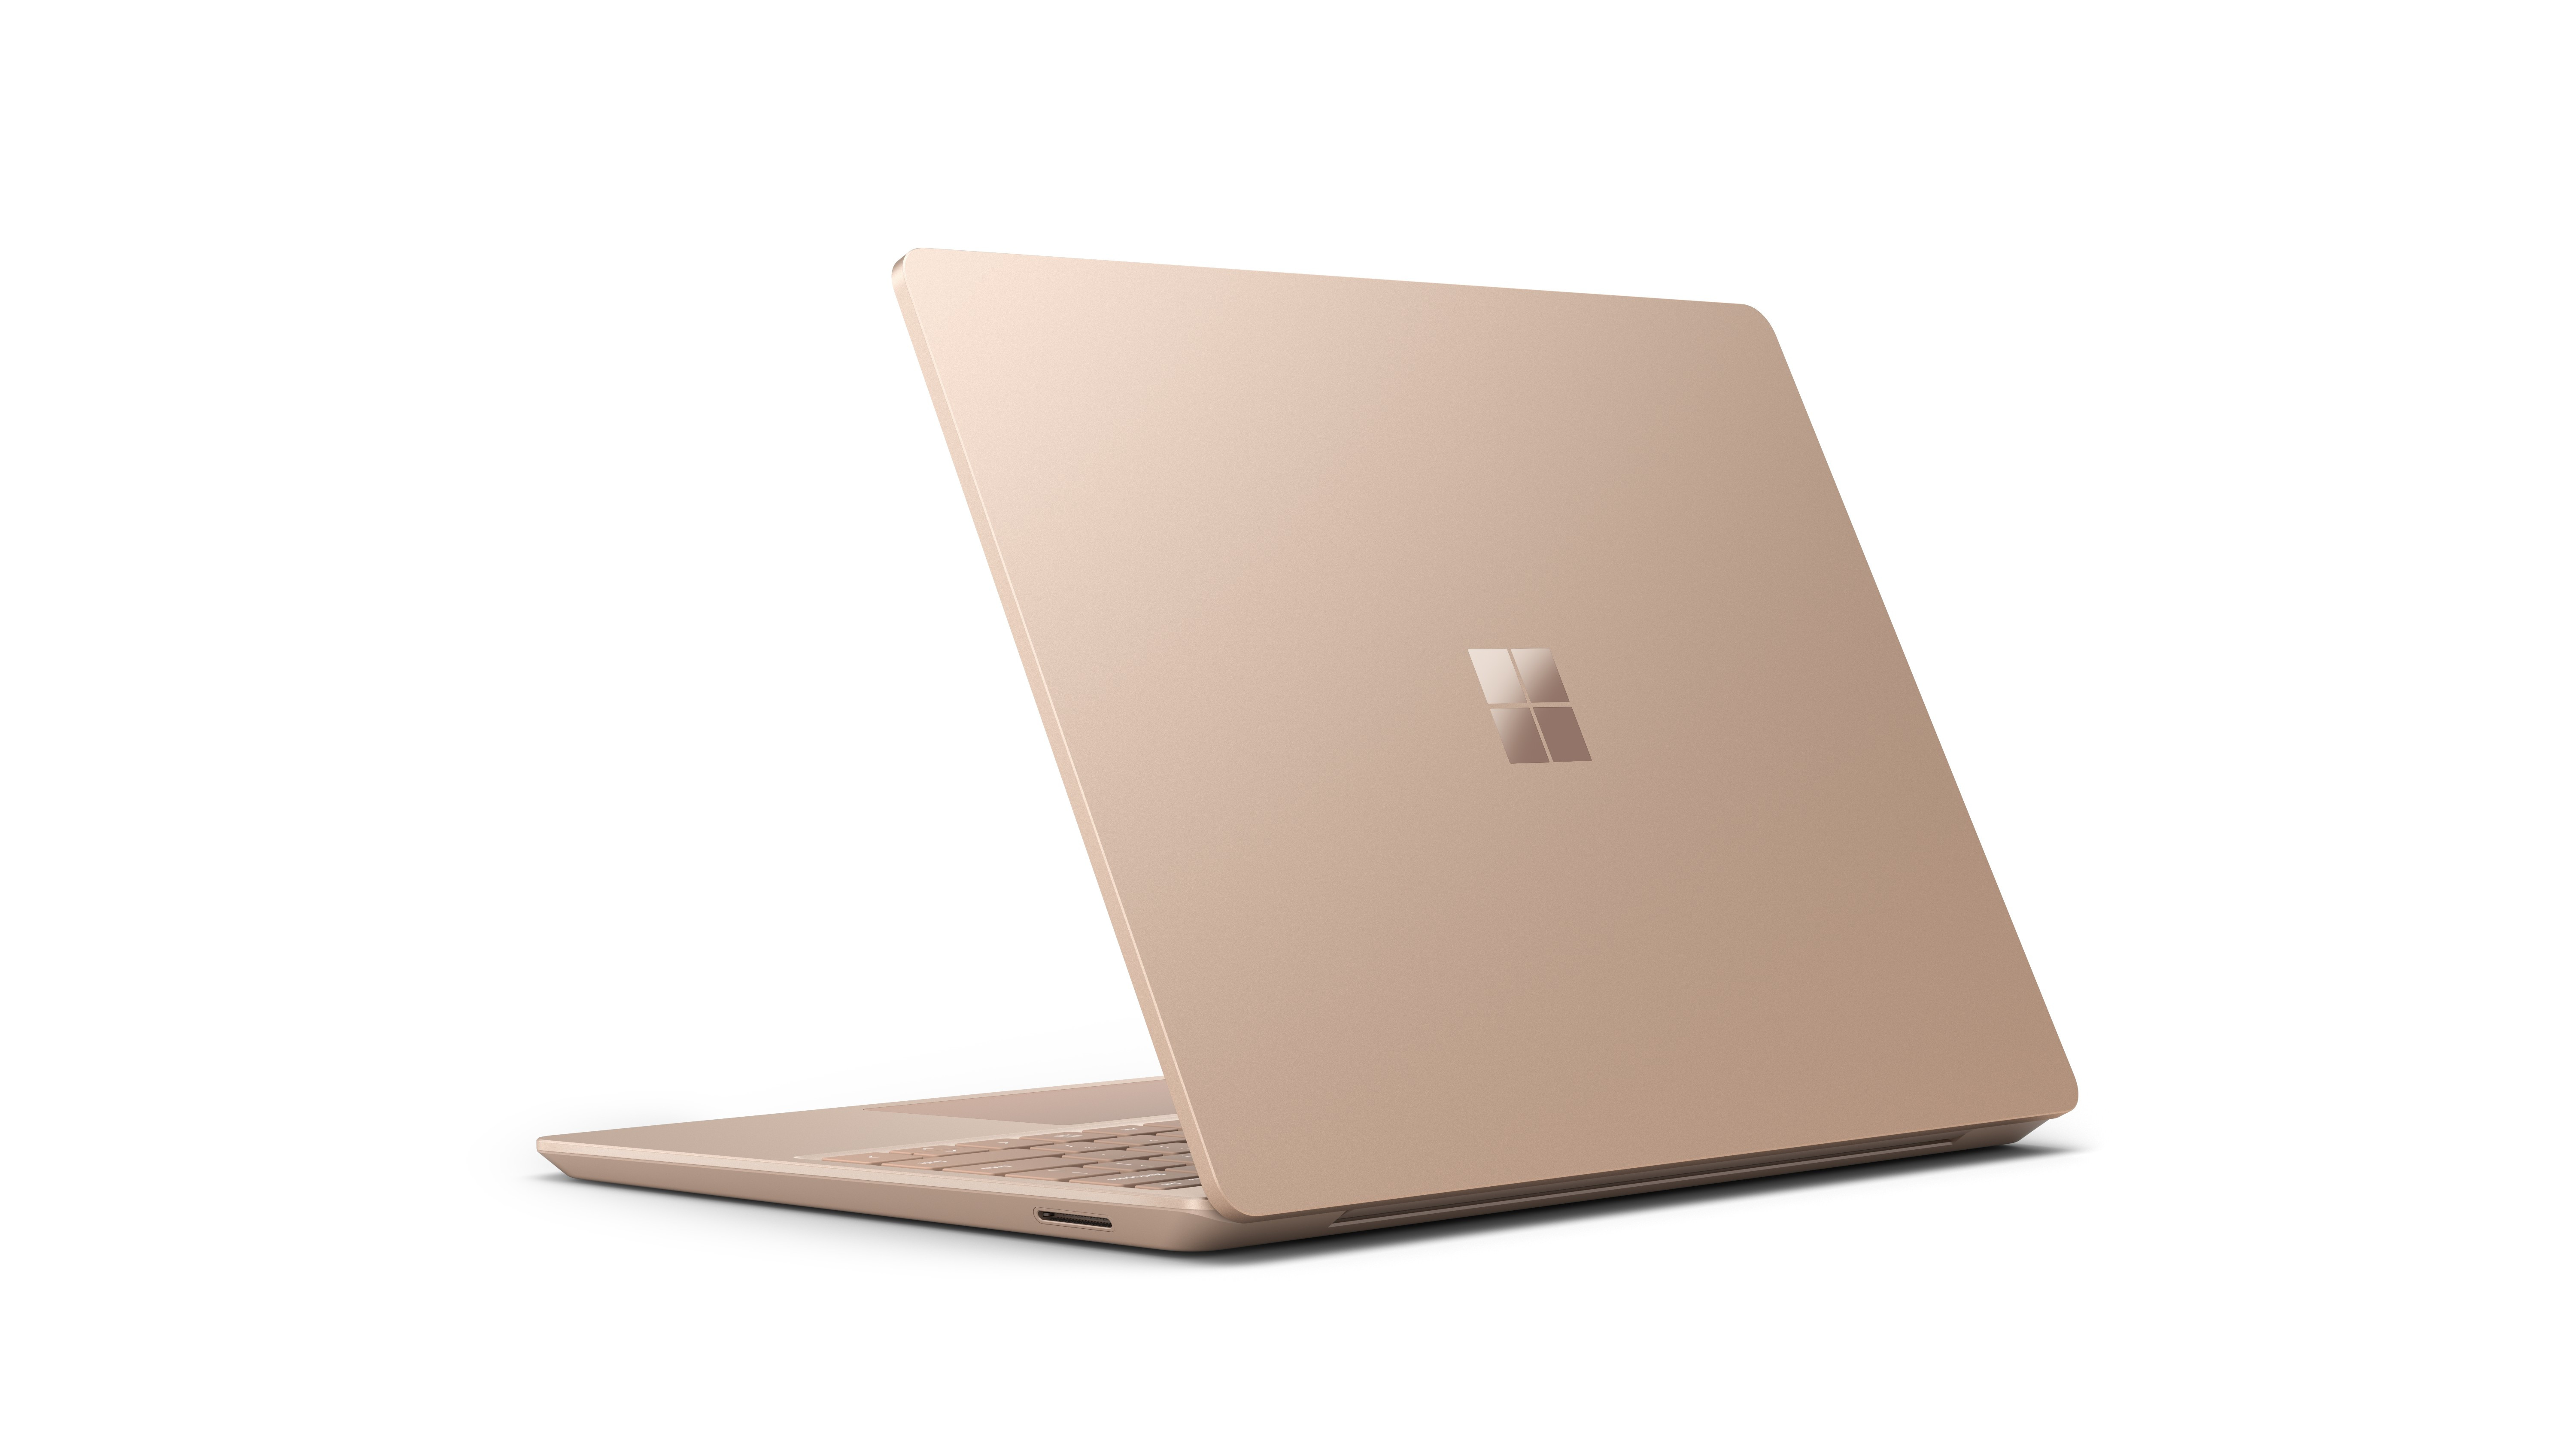 Microsoft Surface Laptop Go i5-1035G1 8GB 128SSD 12.4 Touch W10 Home S Sandstone